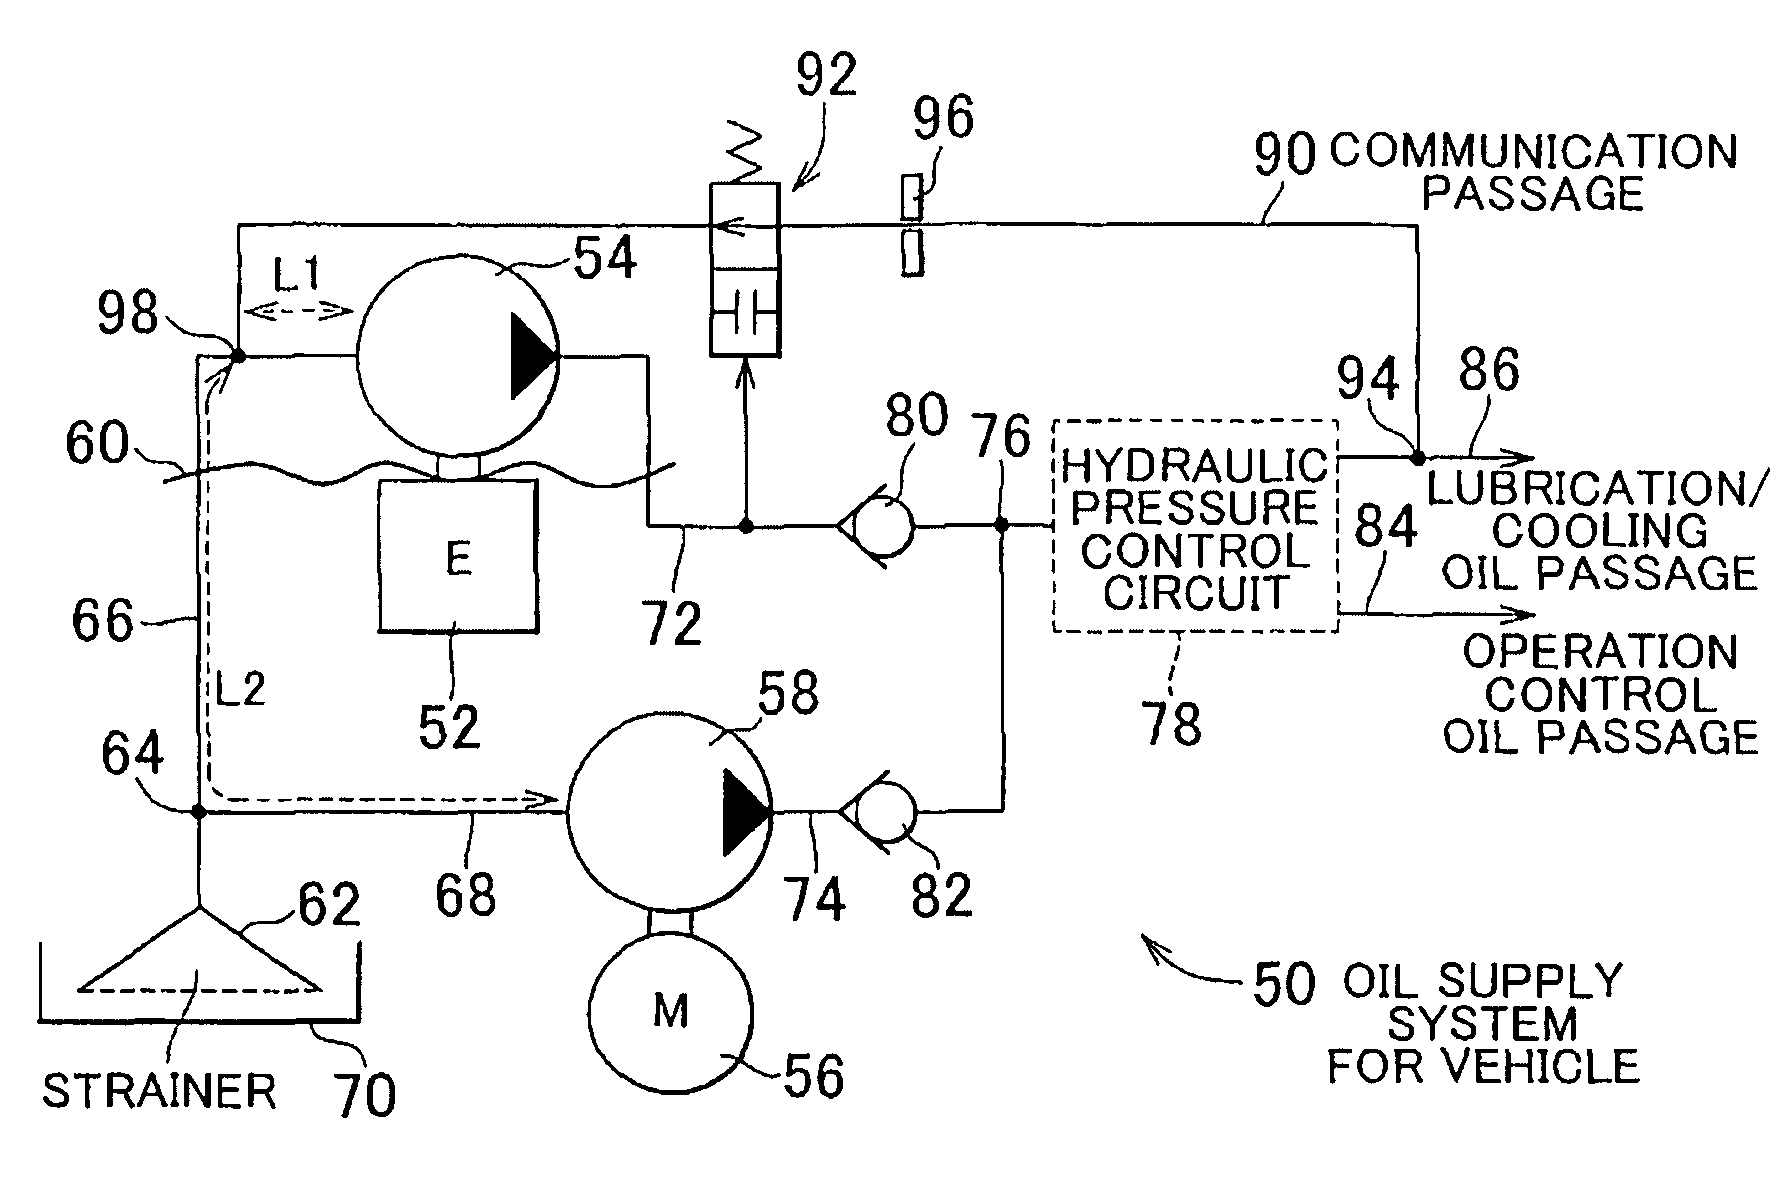 Oil supply system for vehicle